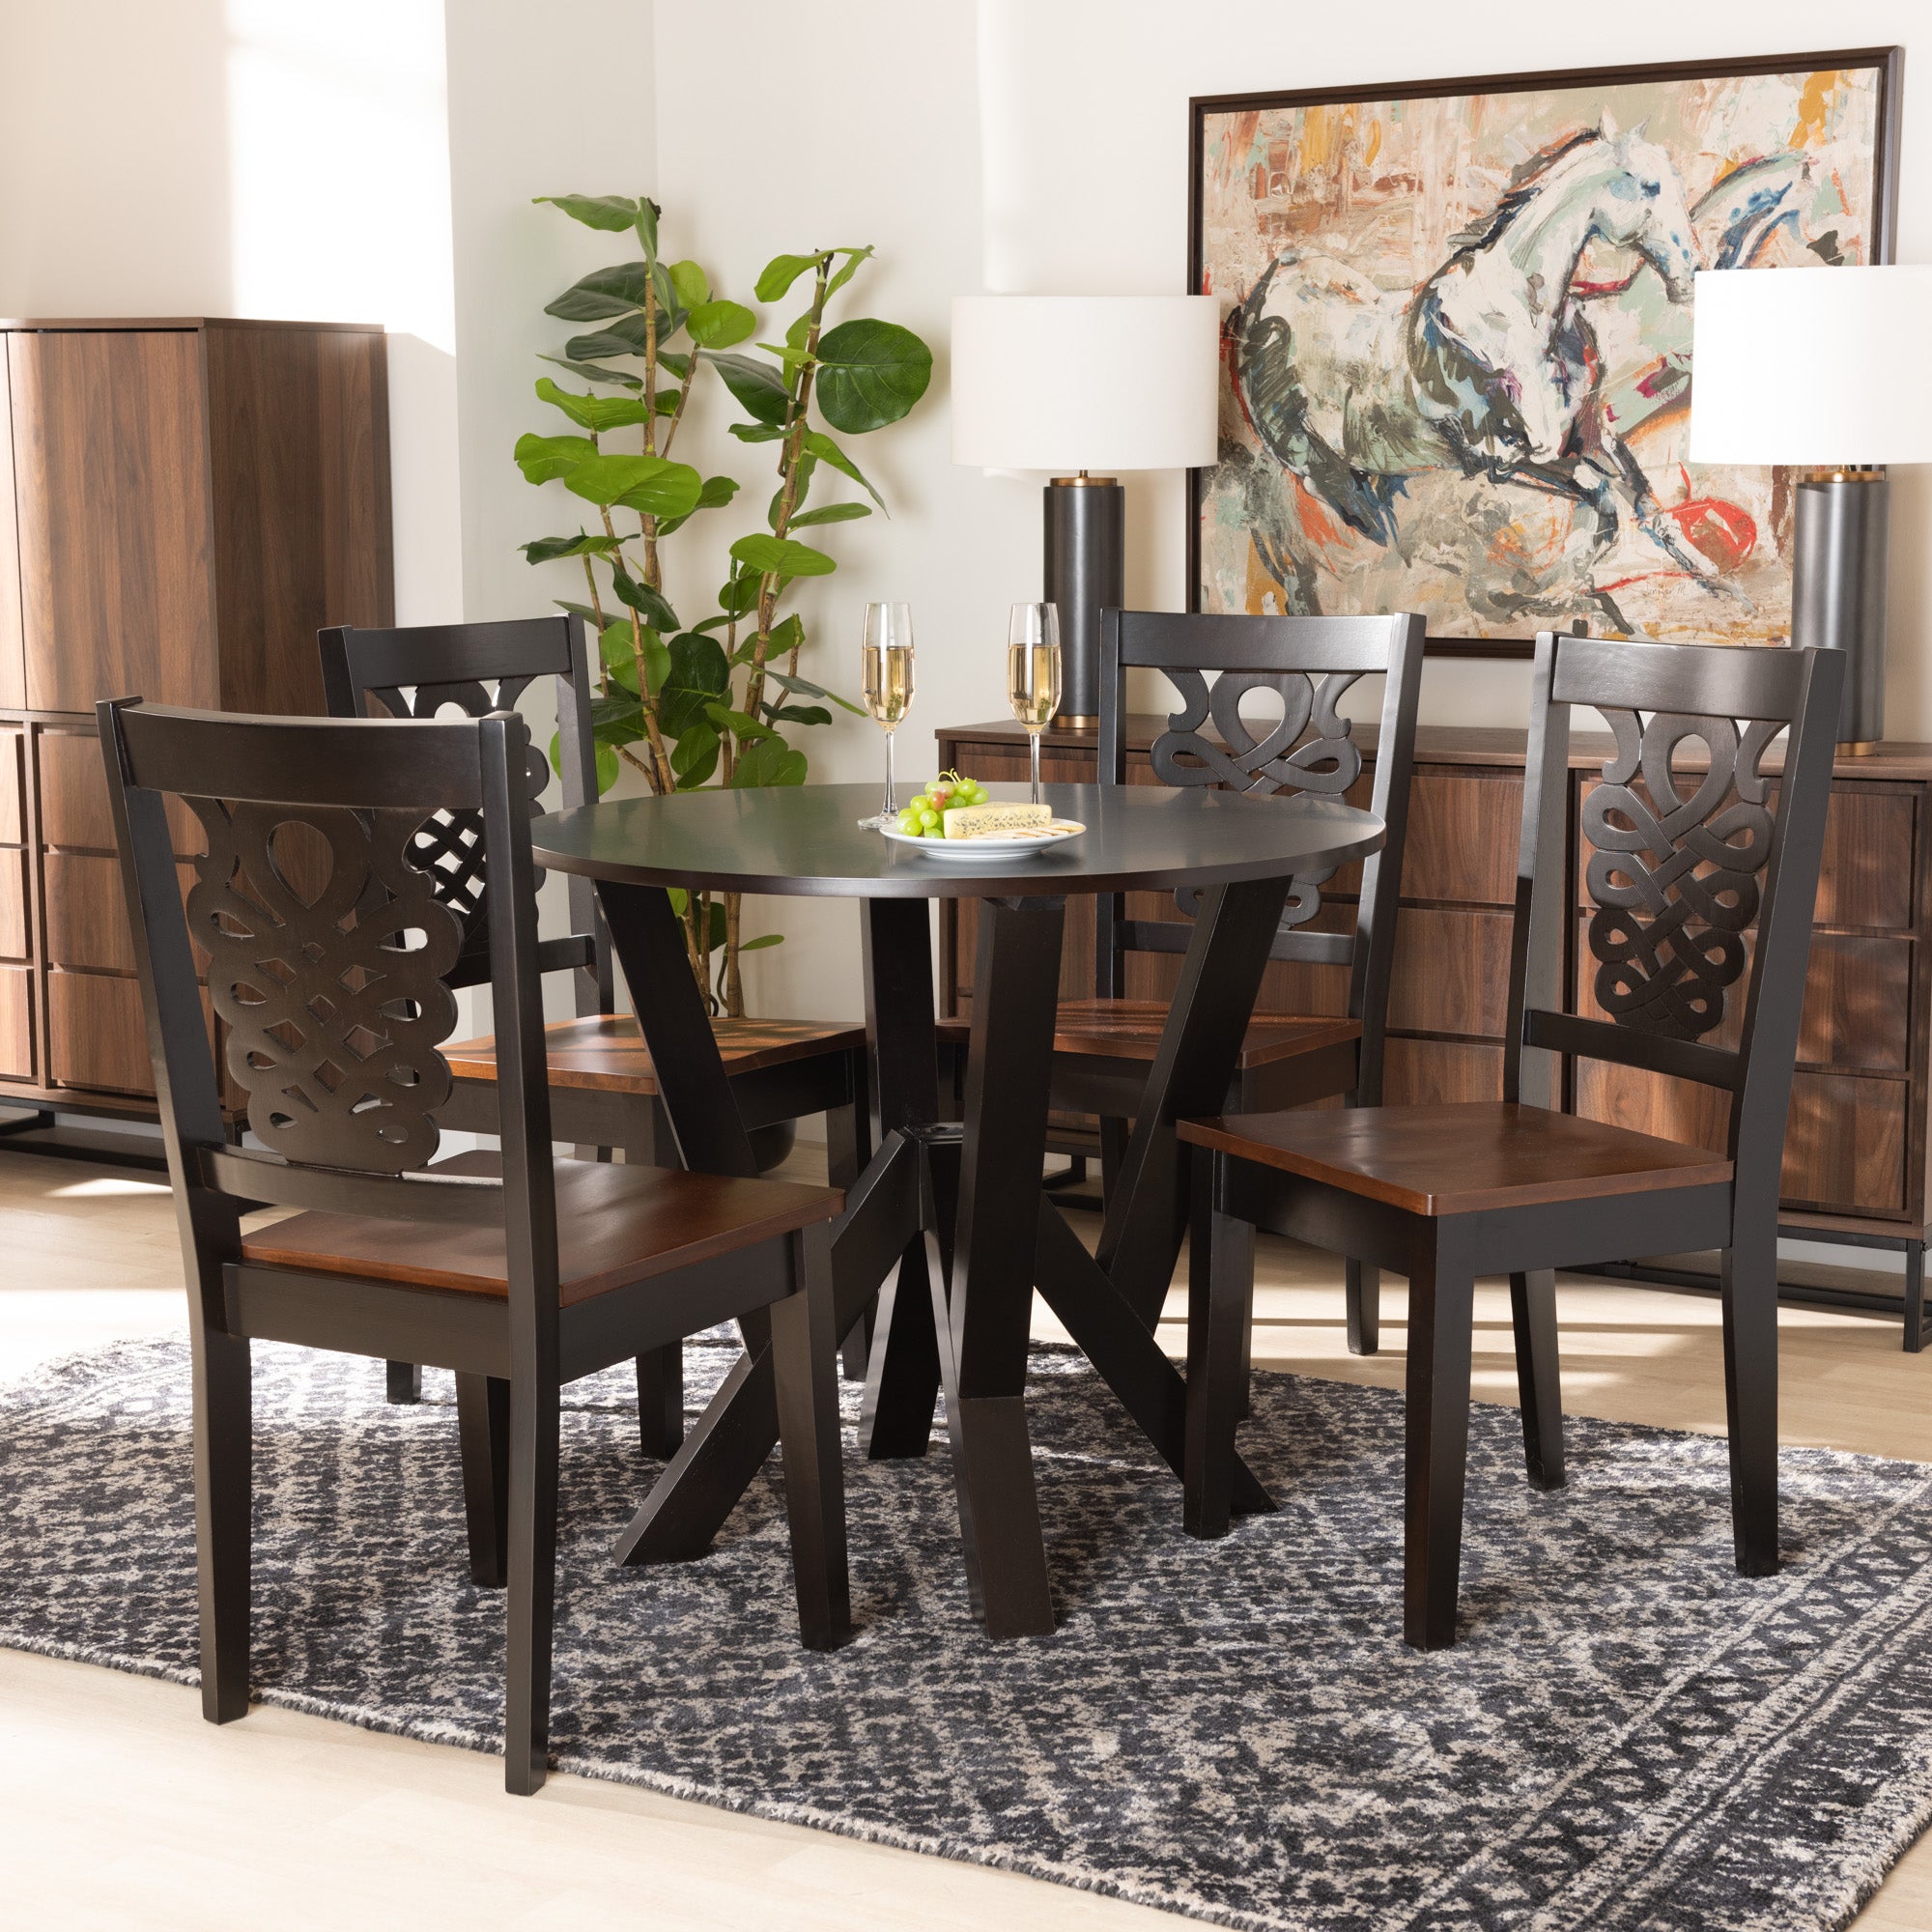 Valda Modern Dining Table & Dining Chairs Two-Tone 5-Piece-Dining Set-Baxton Studio - WI-Wall2Wall Furnishings